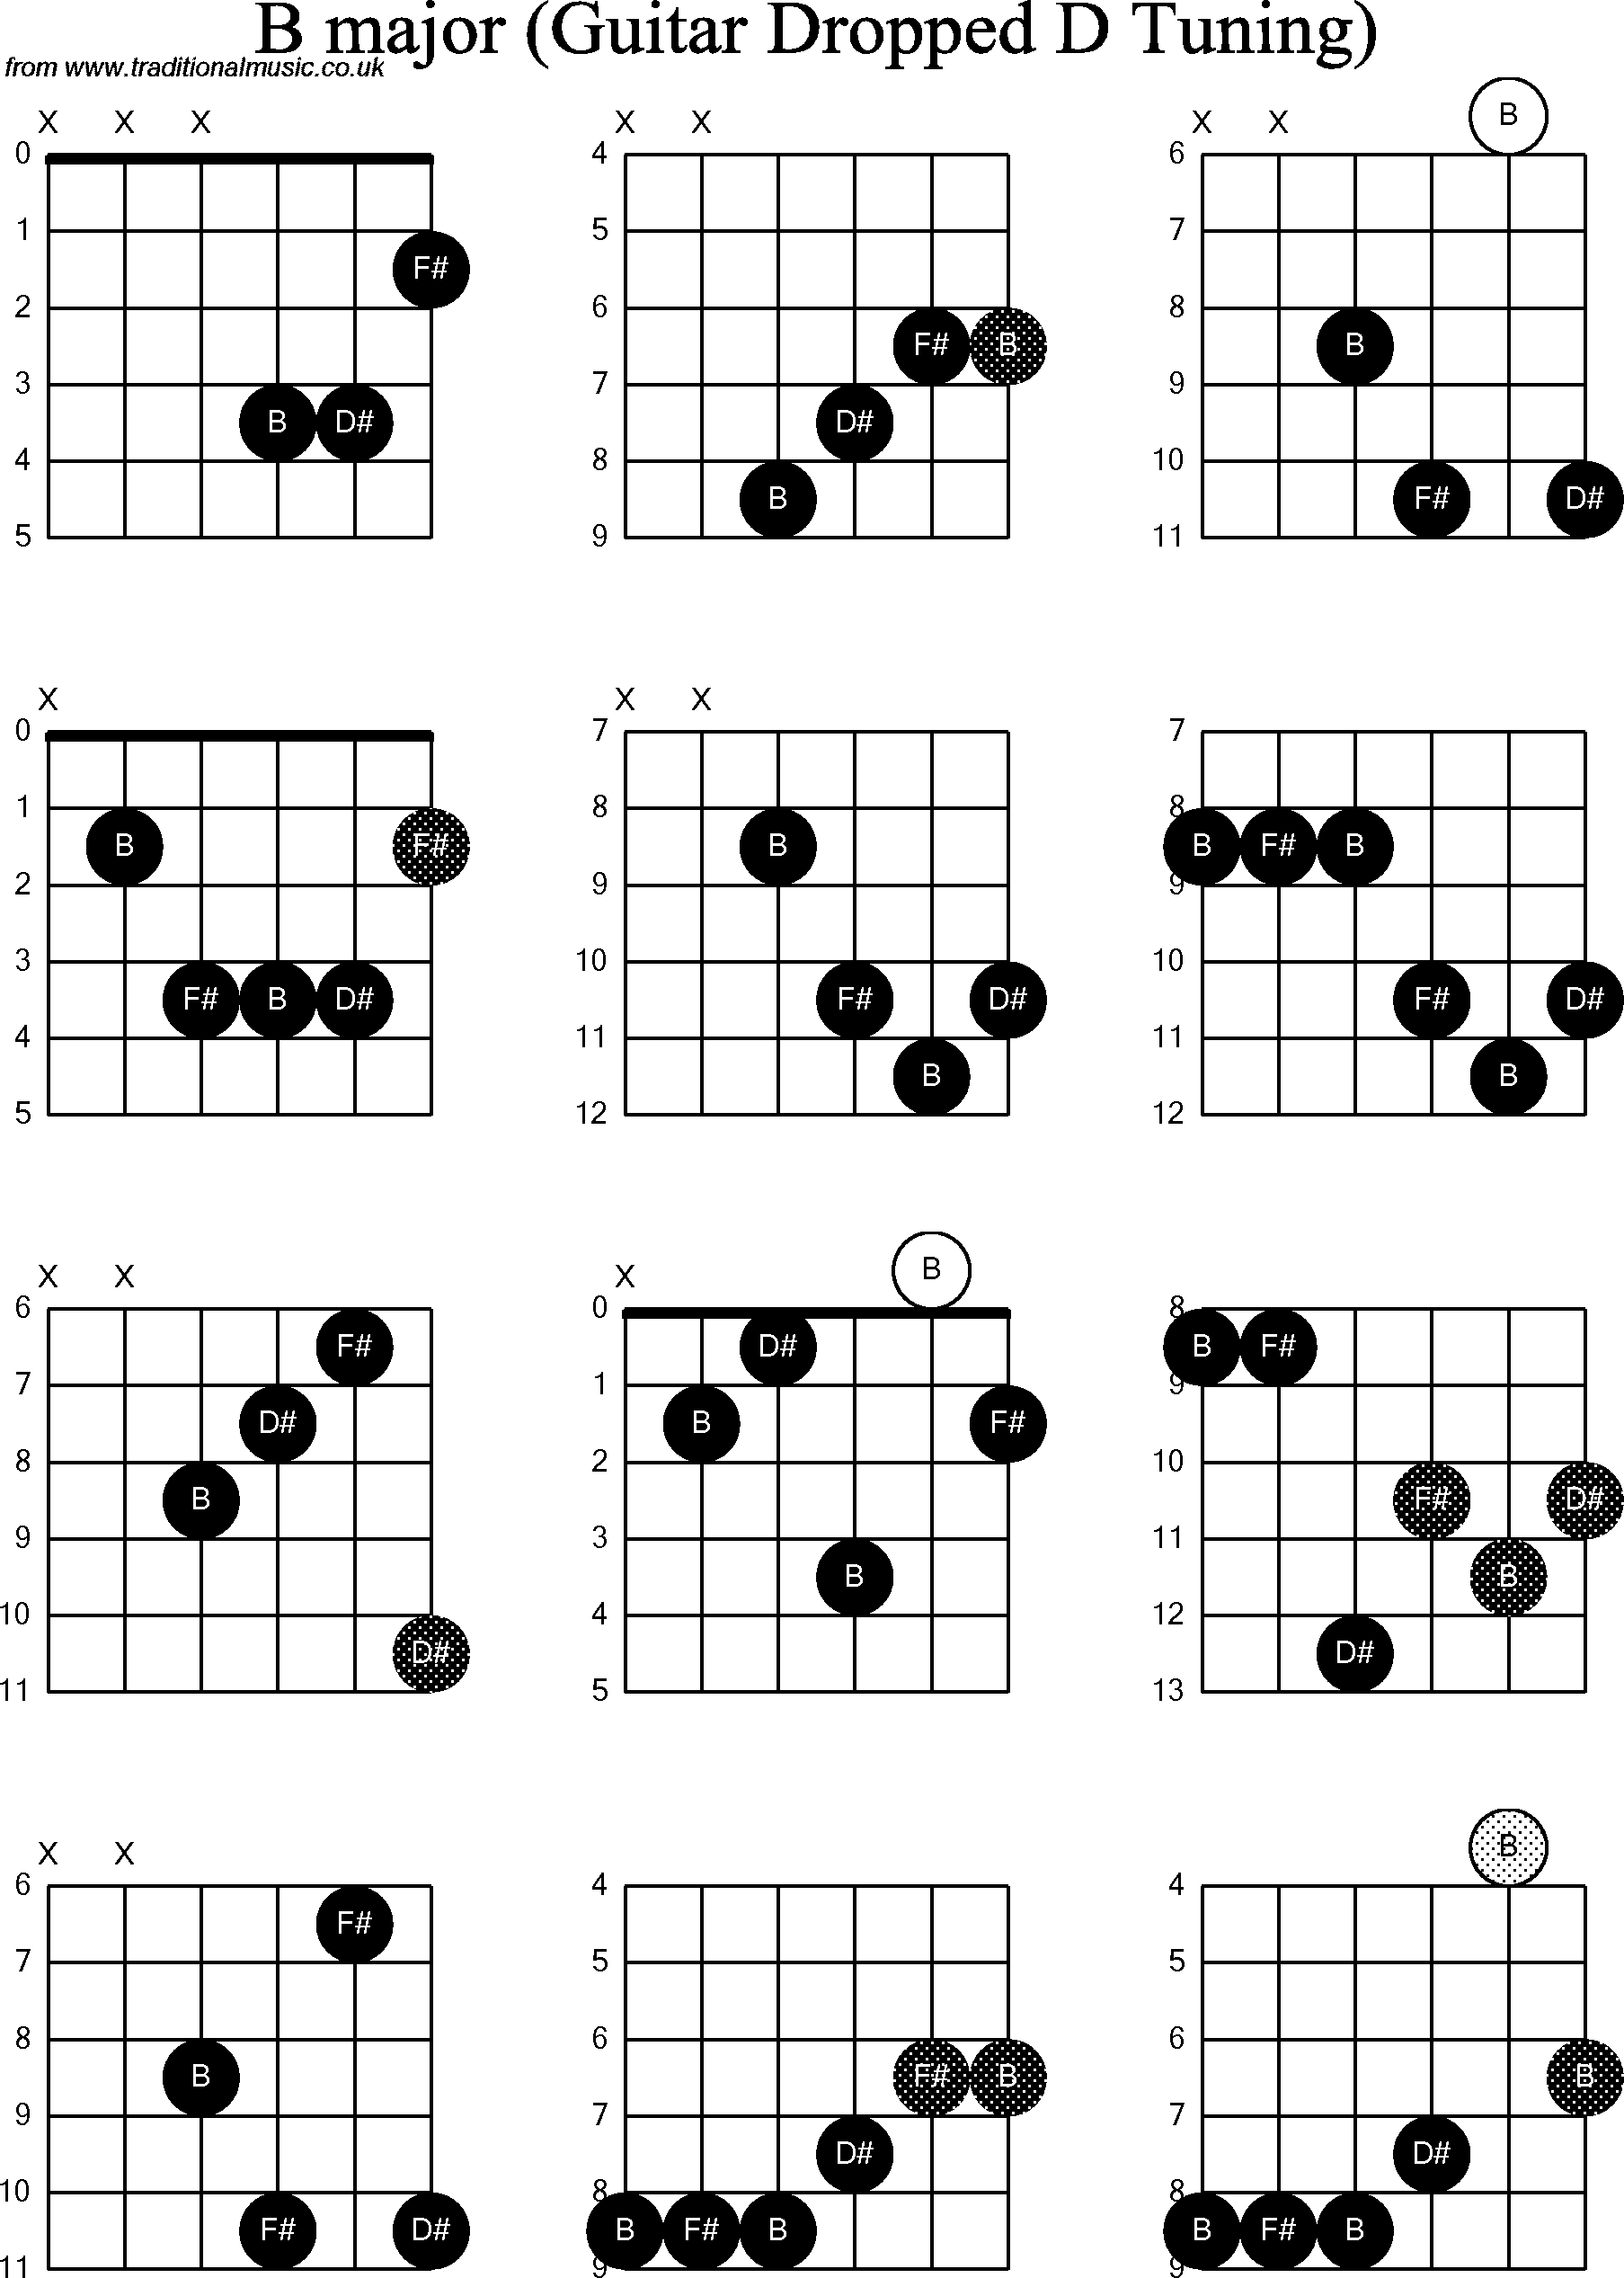 Chord diagrams for dropped D Guitar(DADGBE), B